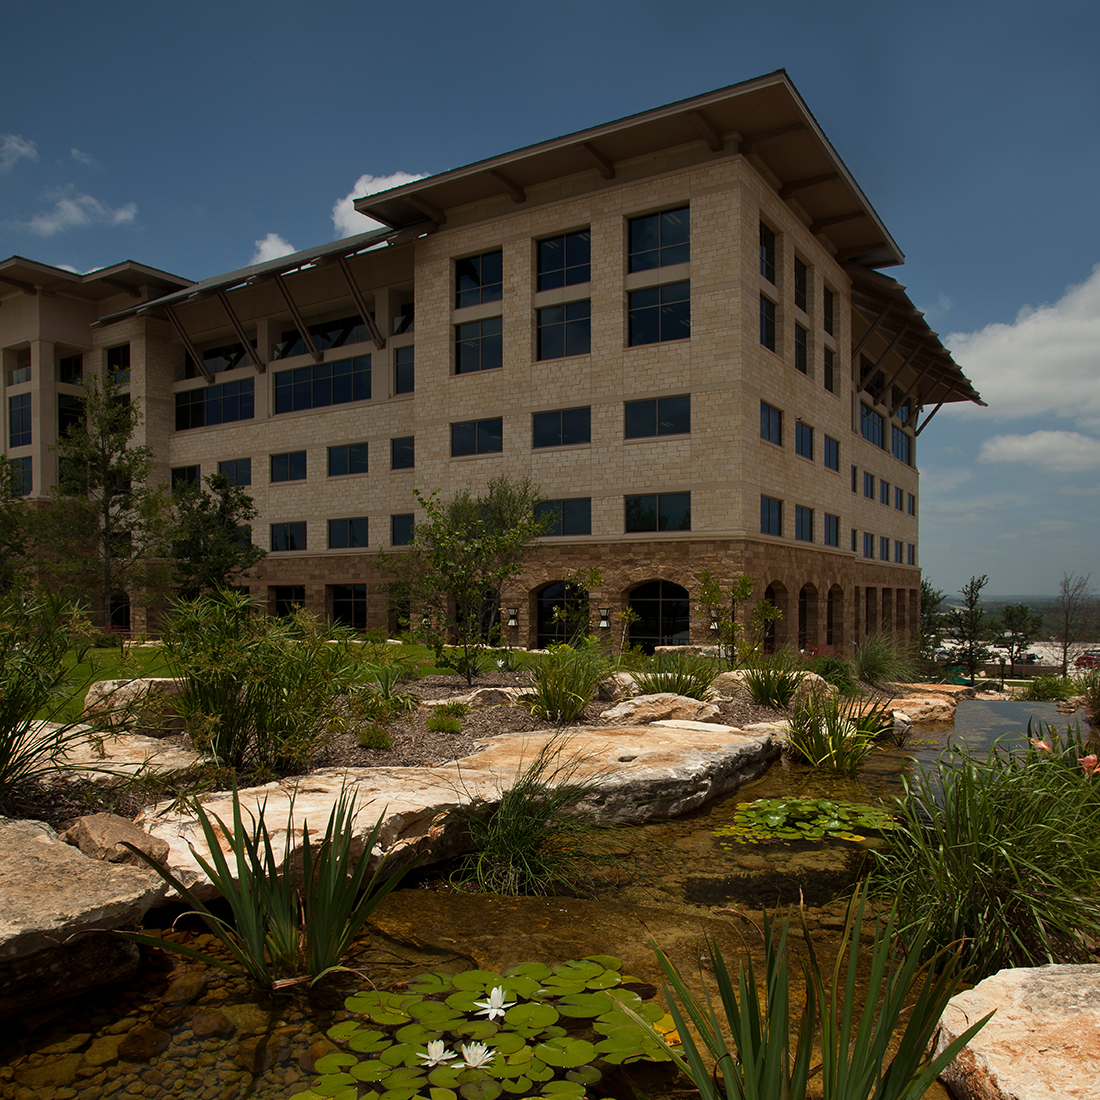 Image of NuStar’s headquarter building in the background with a pond and lily pads.